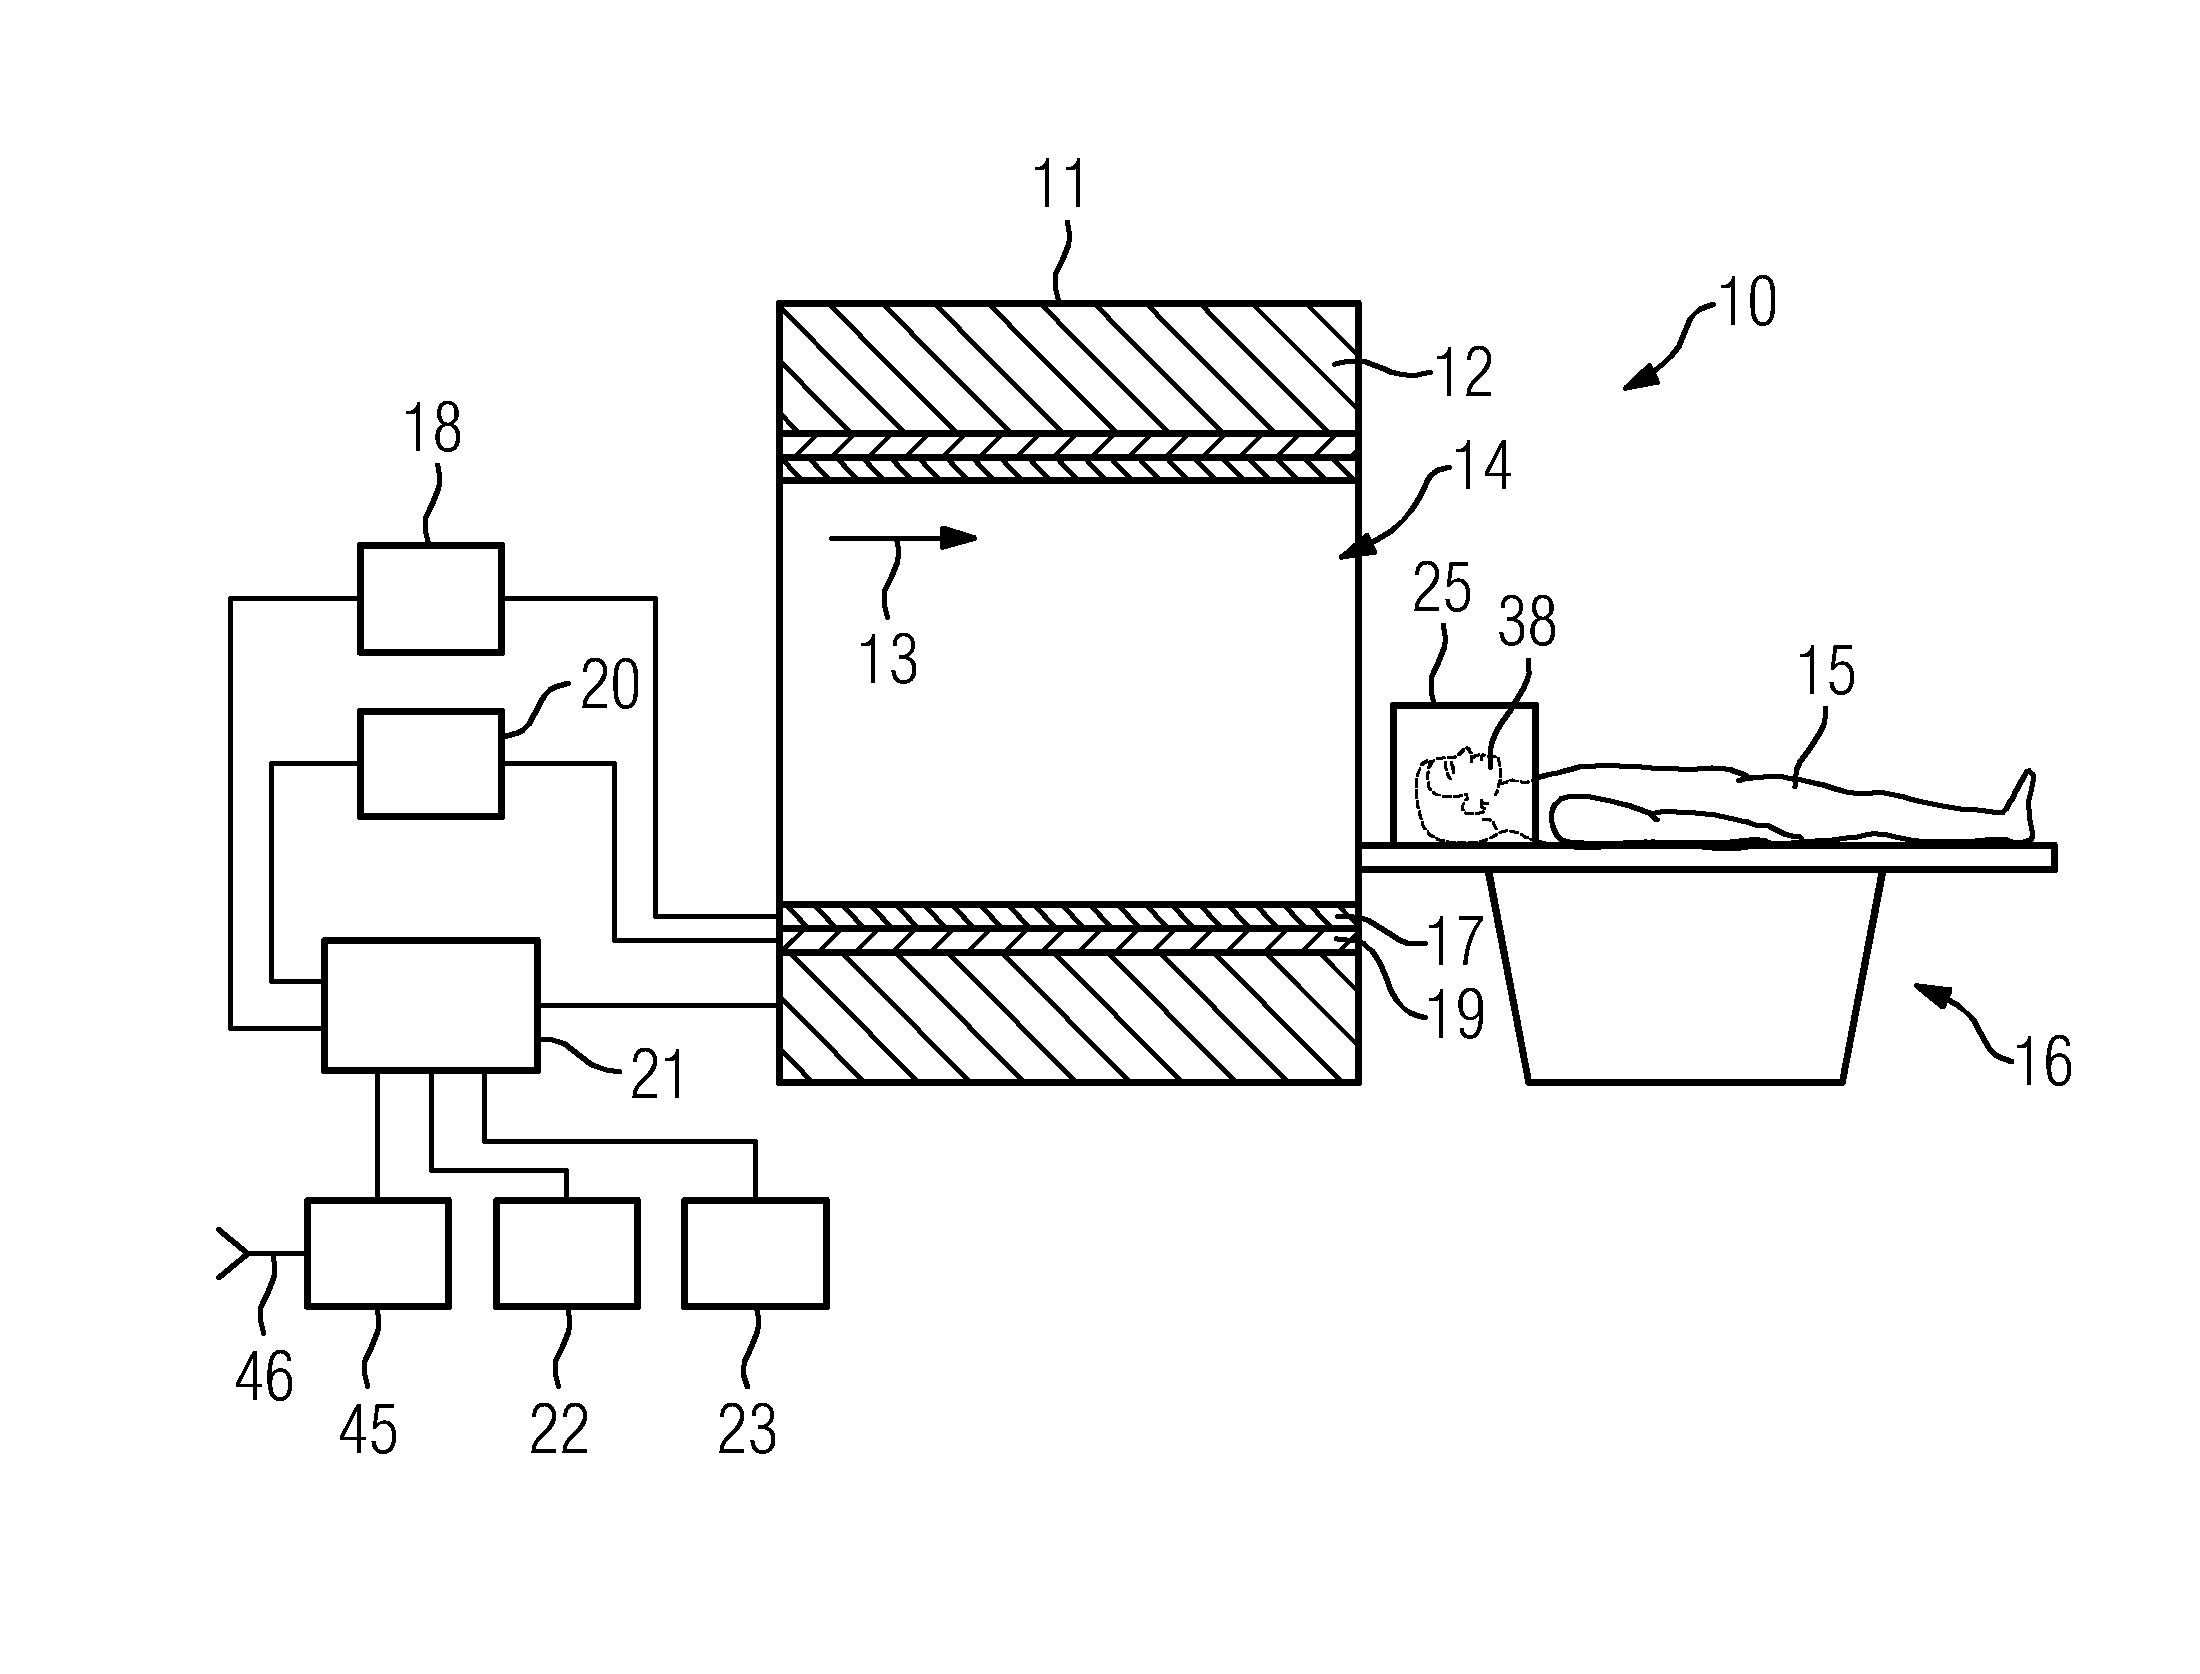 Magnetic resonance image recording unit and a magnetic resonance device having the magnetic resonance image recording unit